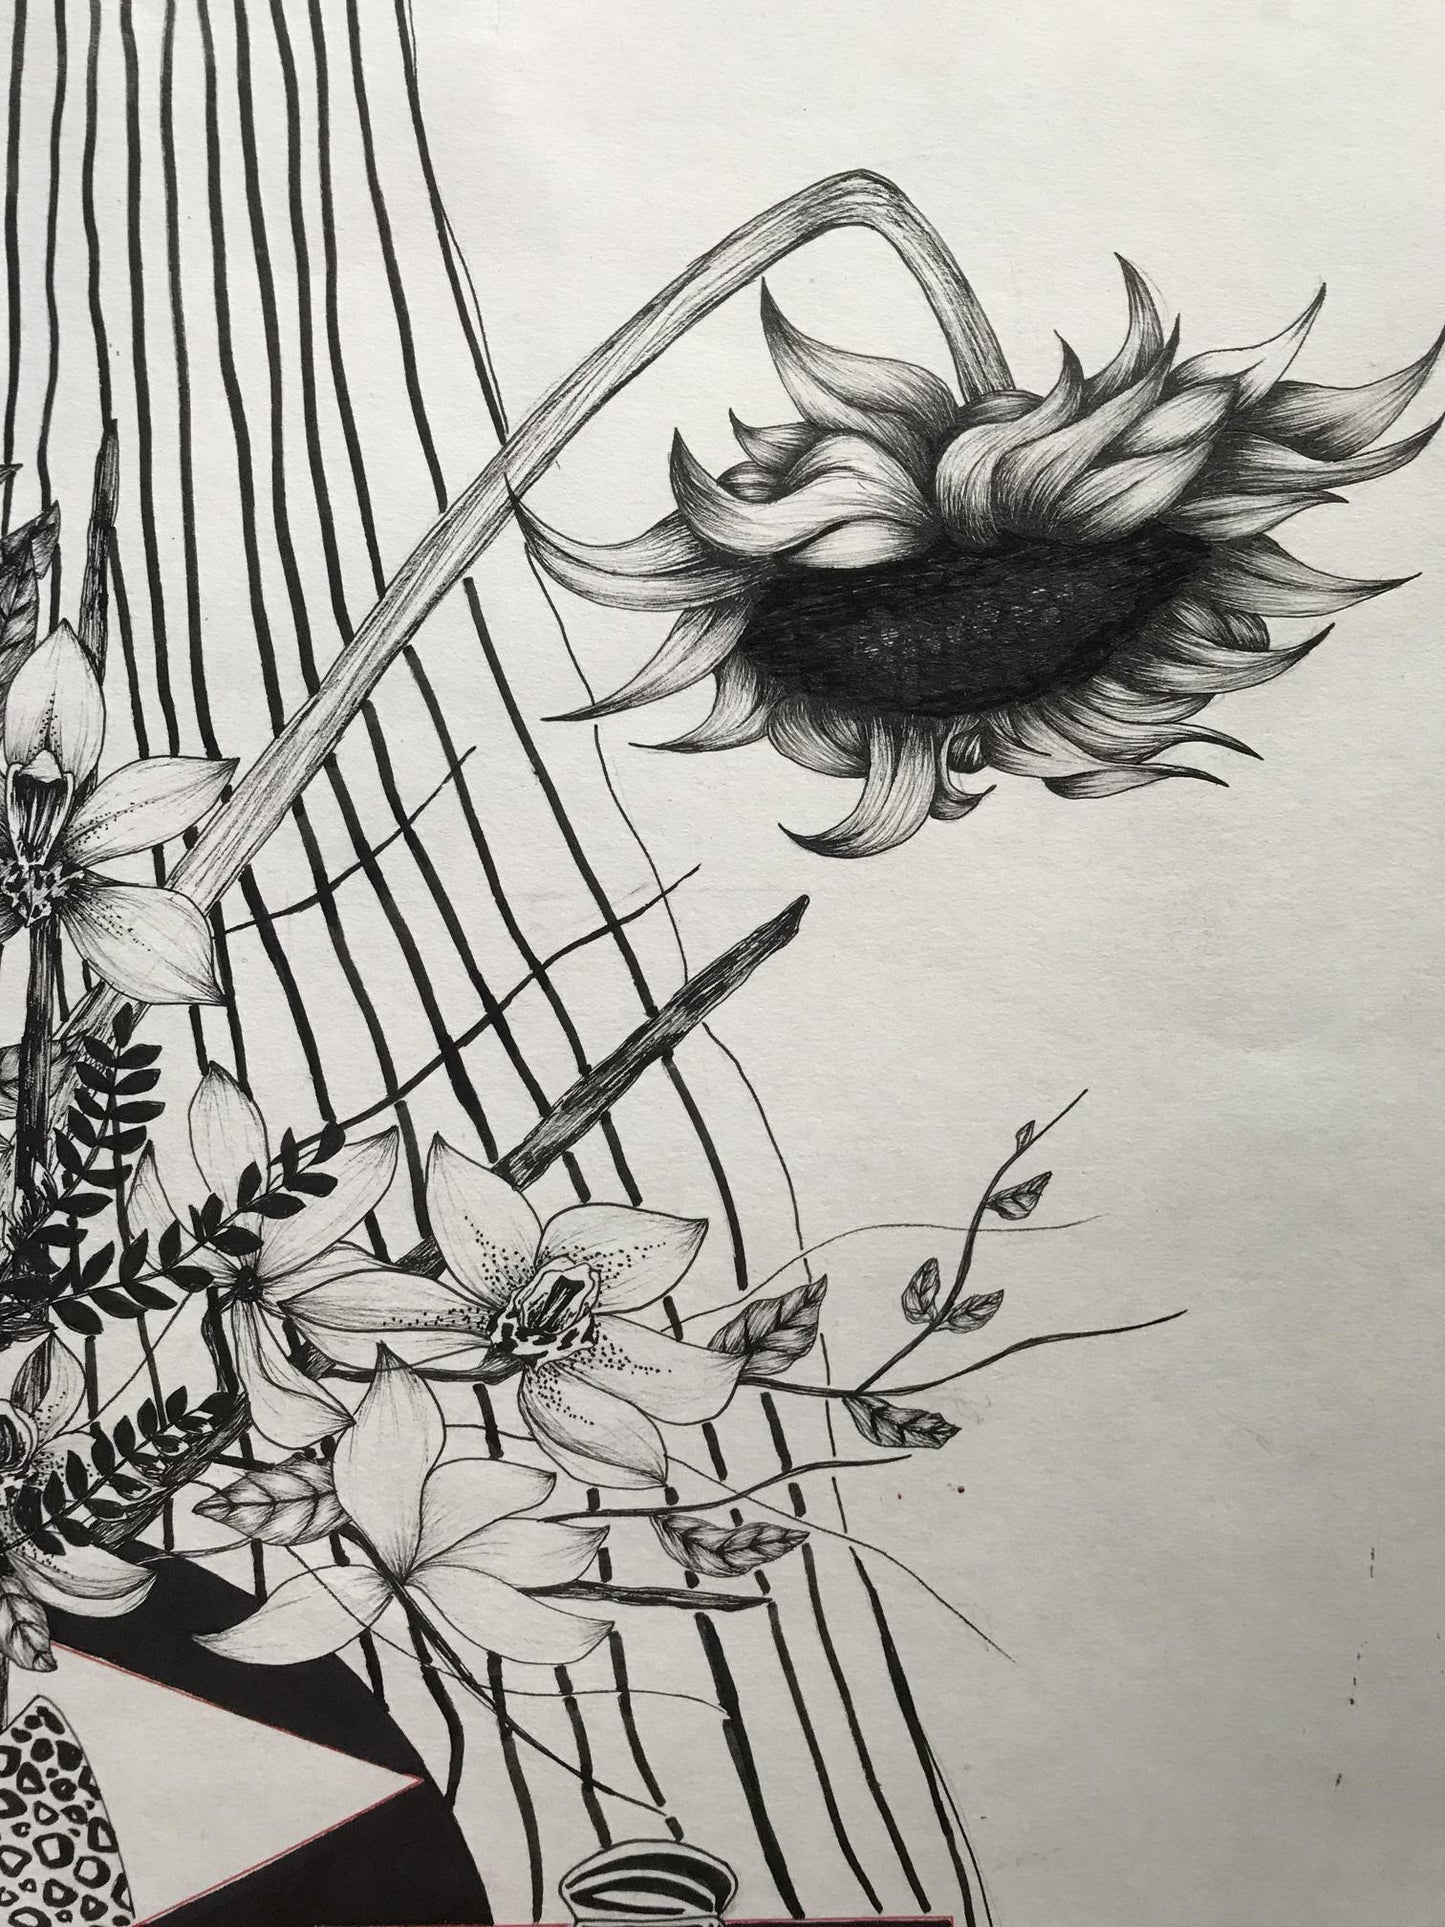 An unnamed artist's abstract pen piece captures the essence of sunflowers and lilies